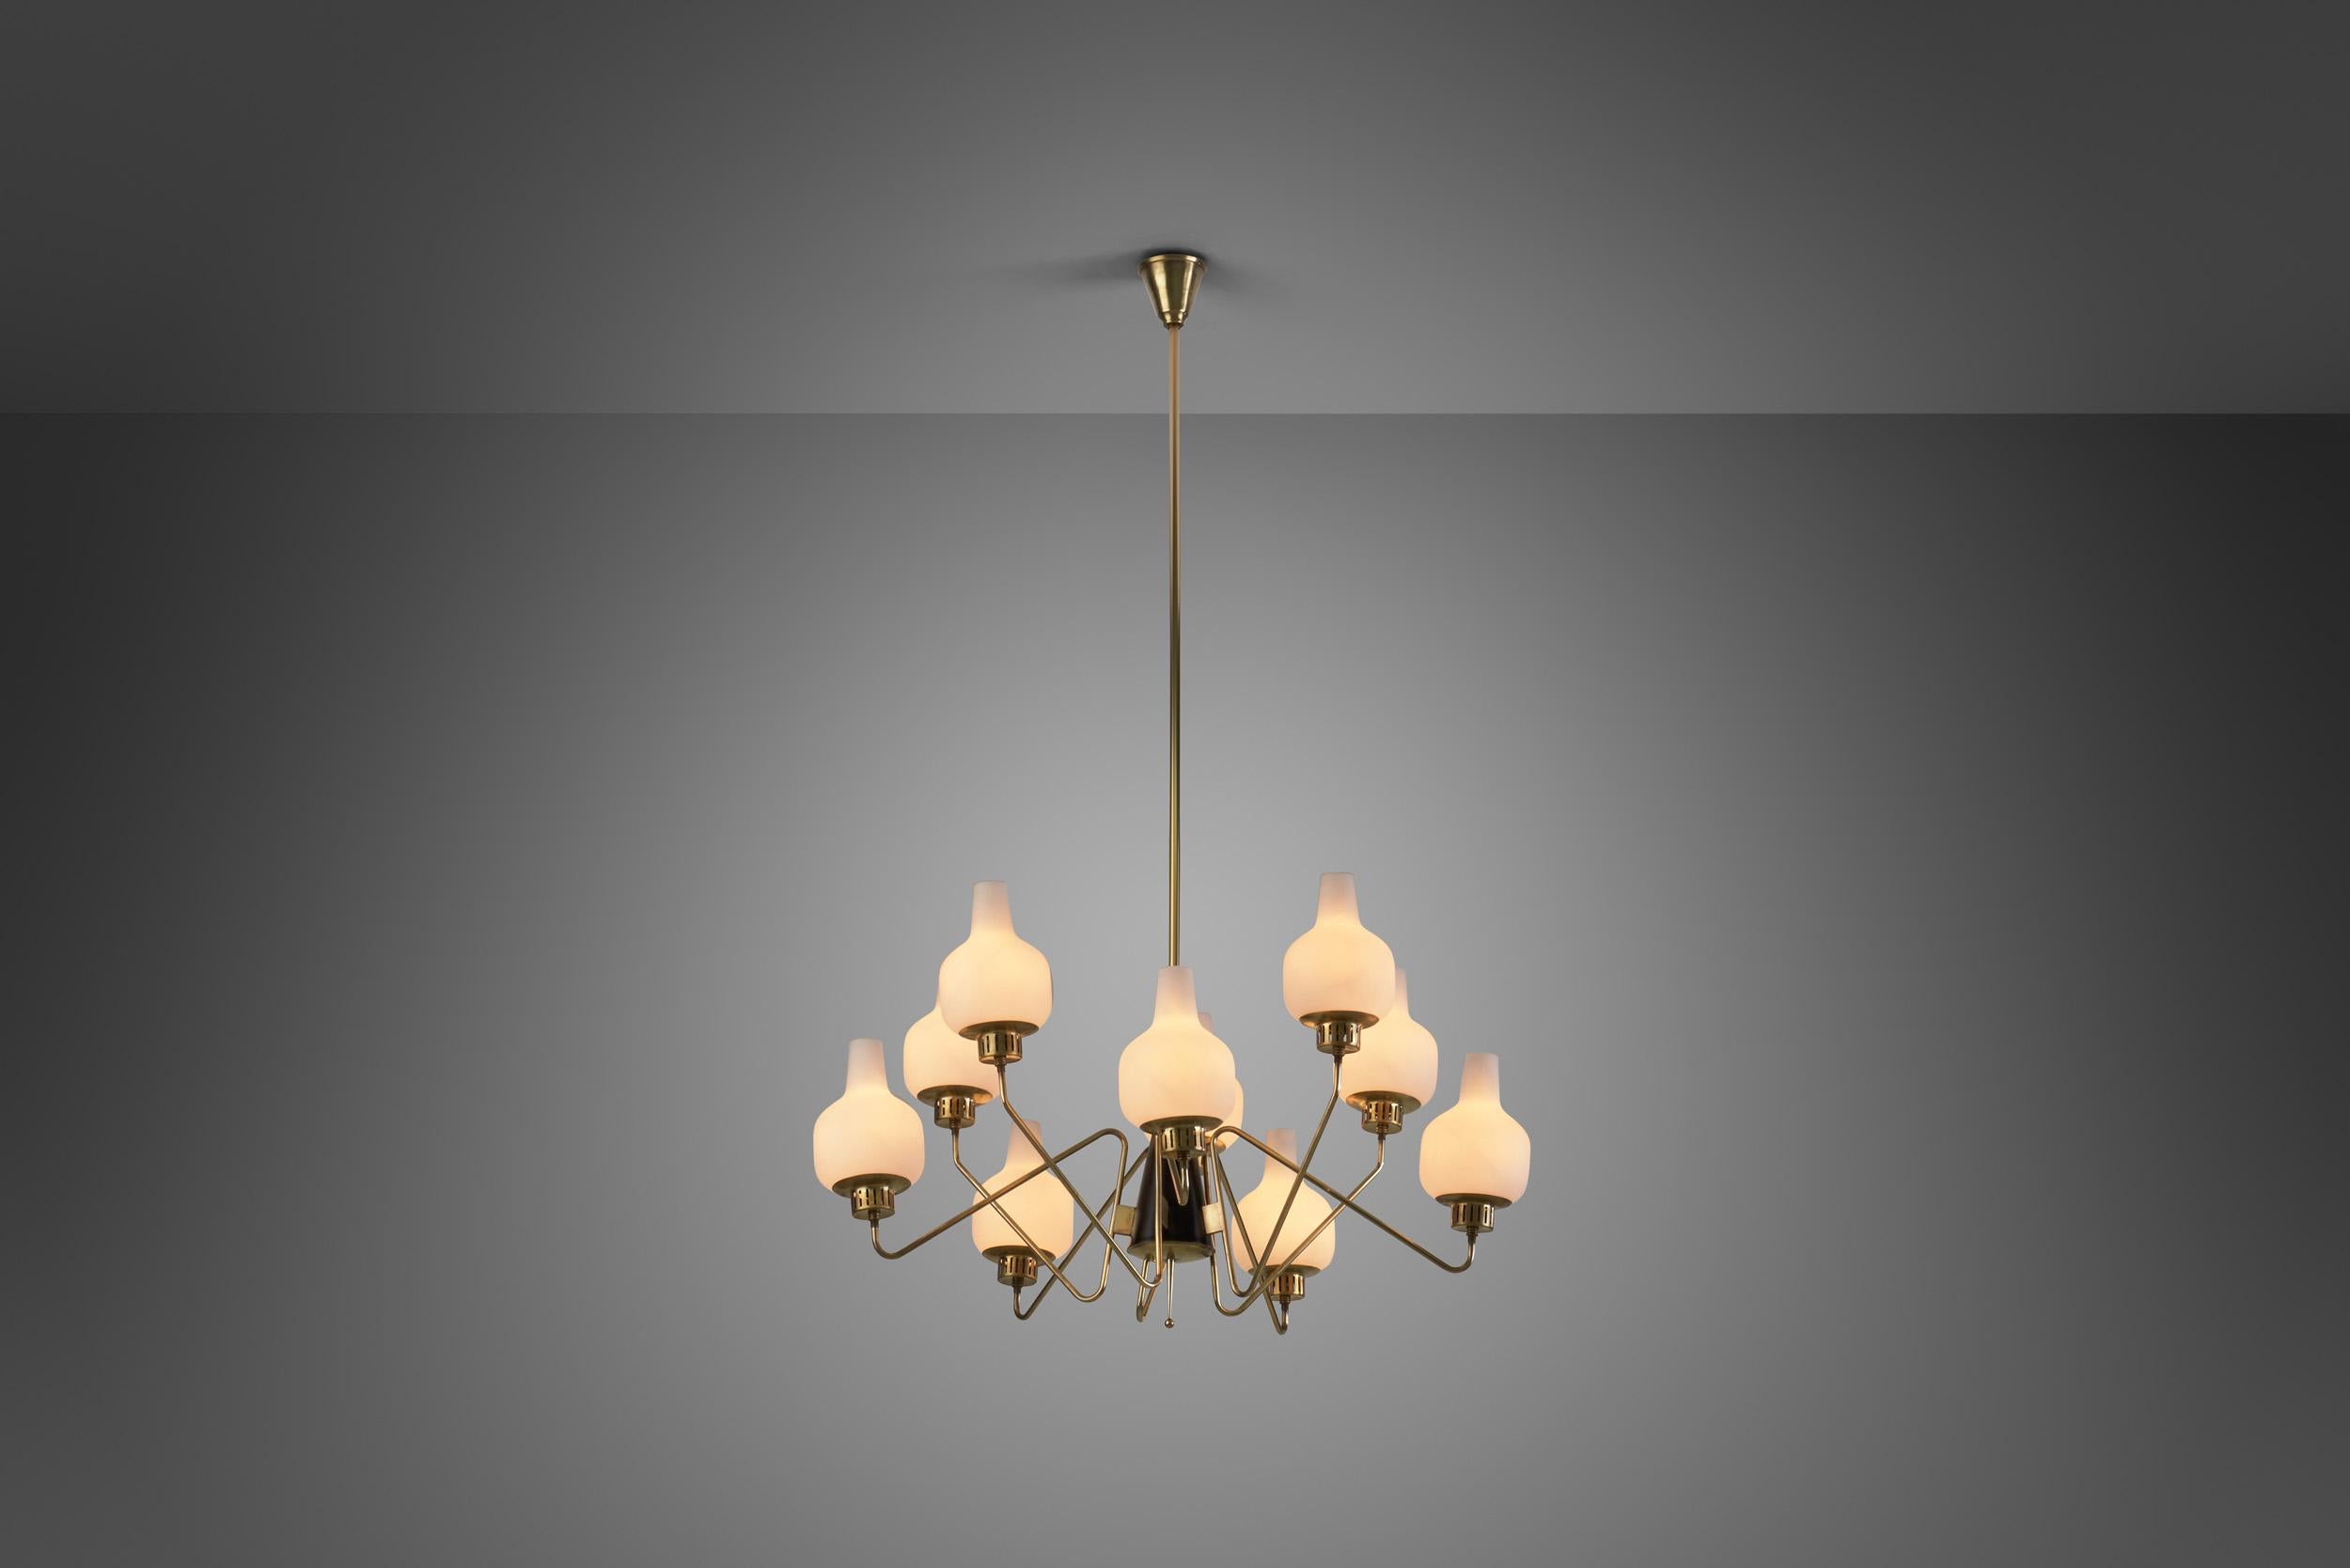 This characteristic Stilnovo chandelier is the definition of an eye-catching design. Decorative lighting is basically the fourth layer of illumination, the jewellery of the room. This lamp contains the impact of accent lighting with a one-of-a-kind